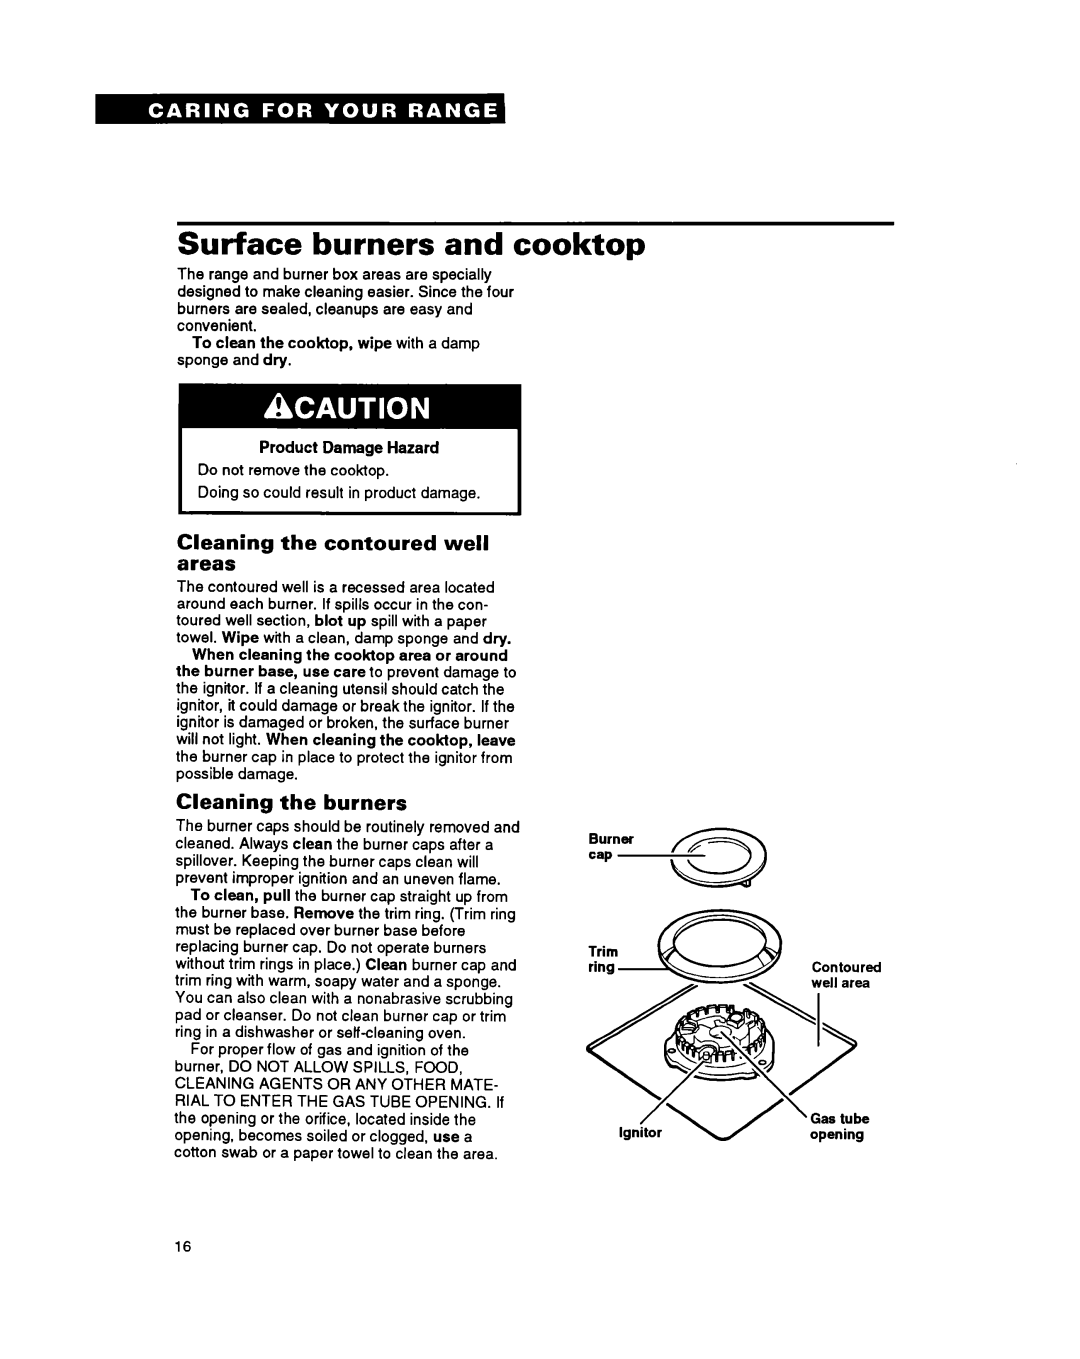 Whirlpool FGP357Y warranty Surface burners and cooktop, Cleaning the contoured well areas, Cleaning the burners 